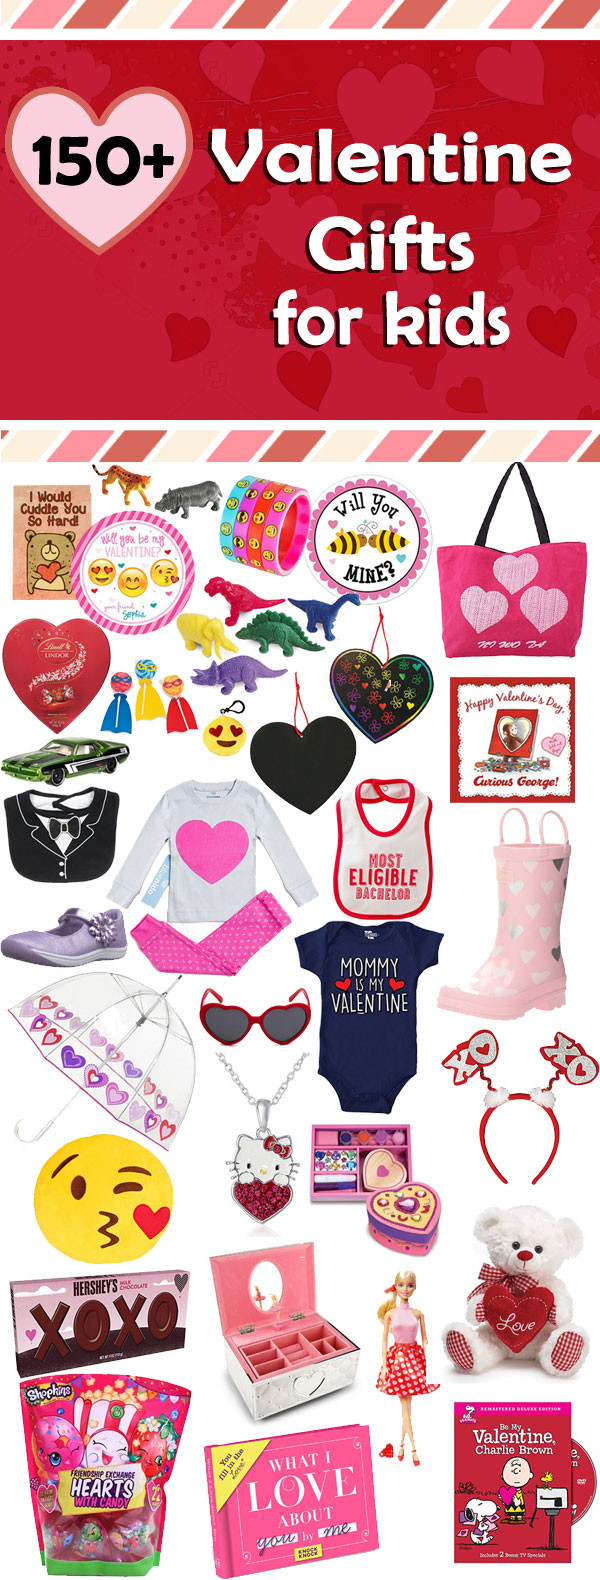 Best Valentines Gifts For Kids
 Valentine Gifts For Kids